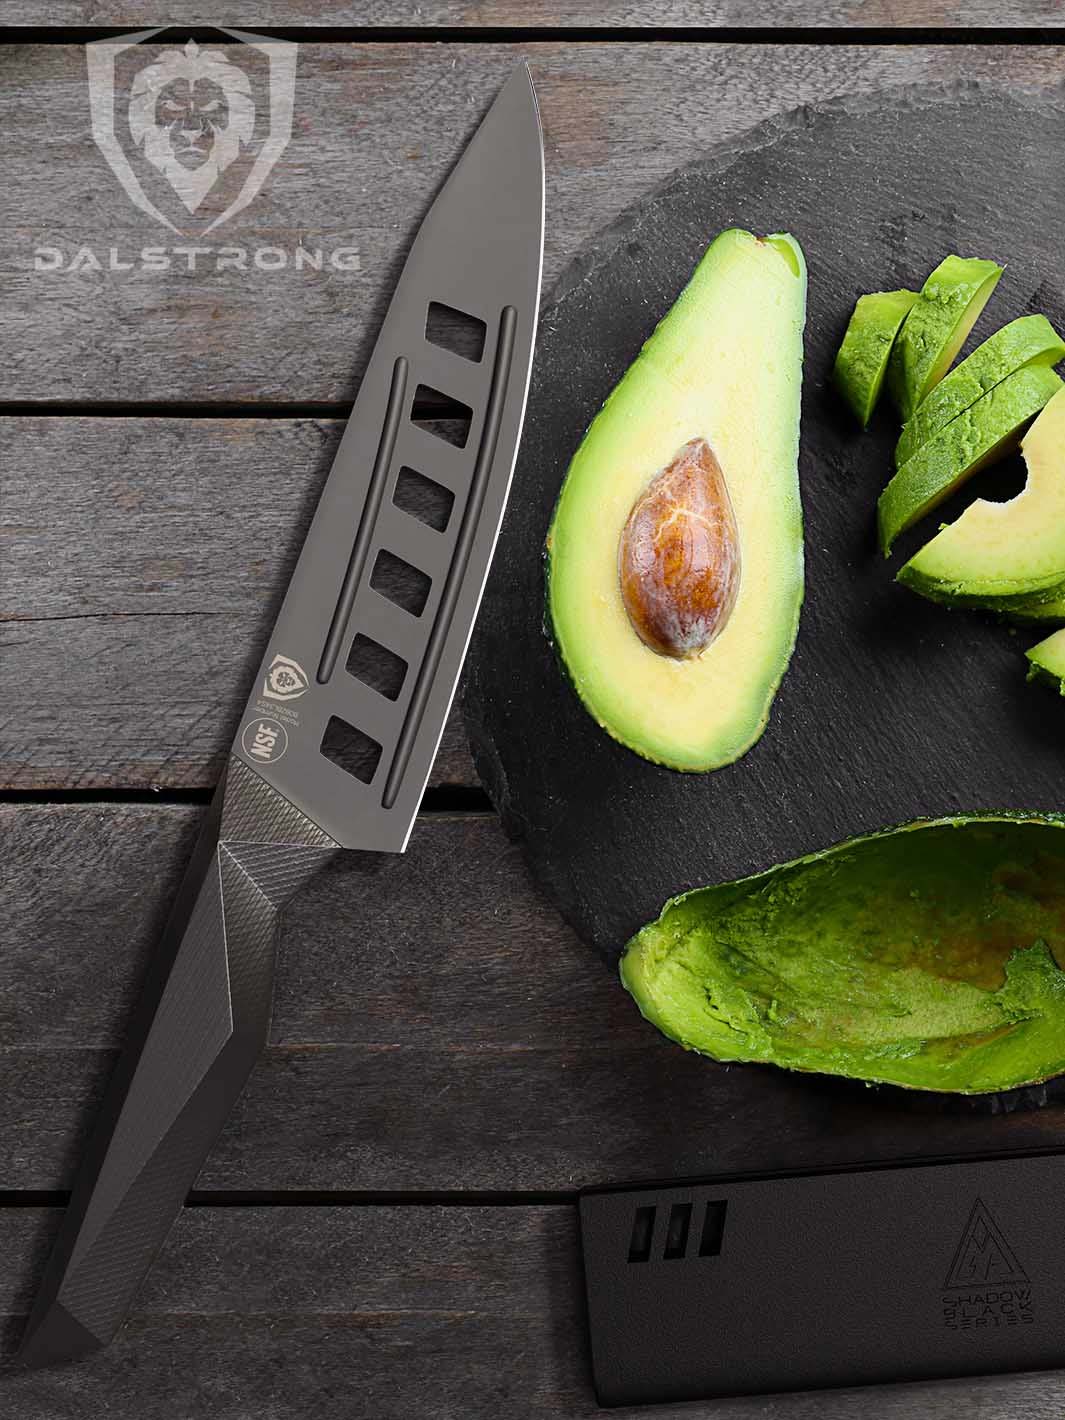 Dalstrong shadow black series 7 inch vegetable knife and black sheath beside slices of green avocado on a wooden board.